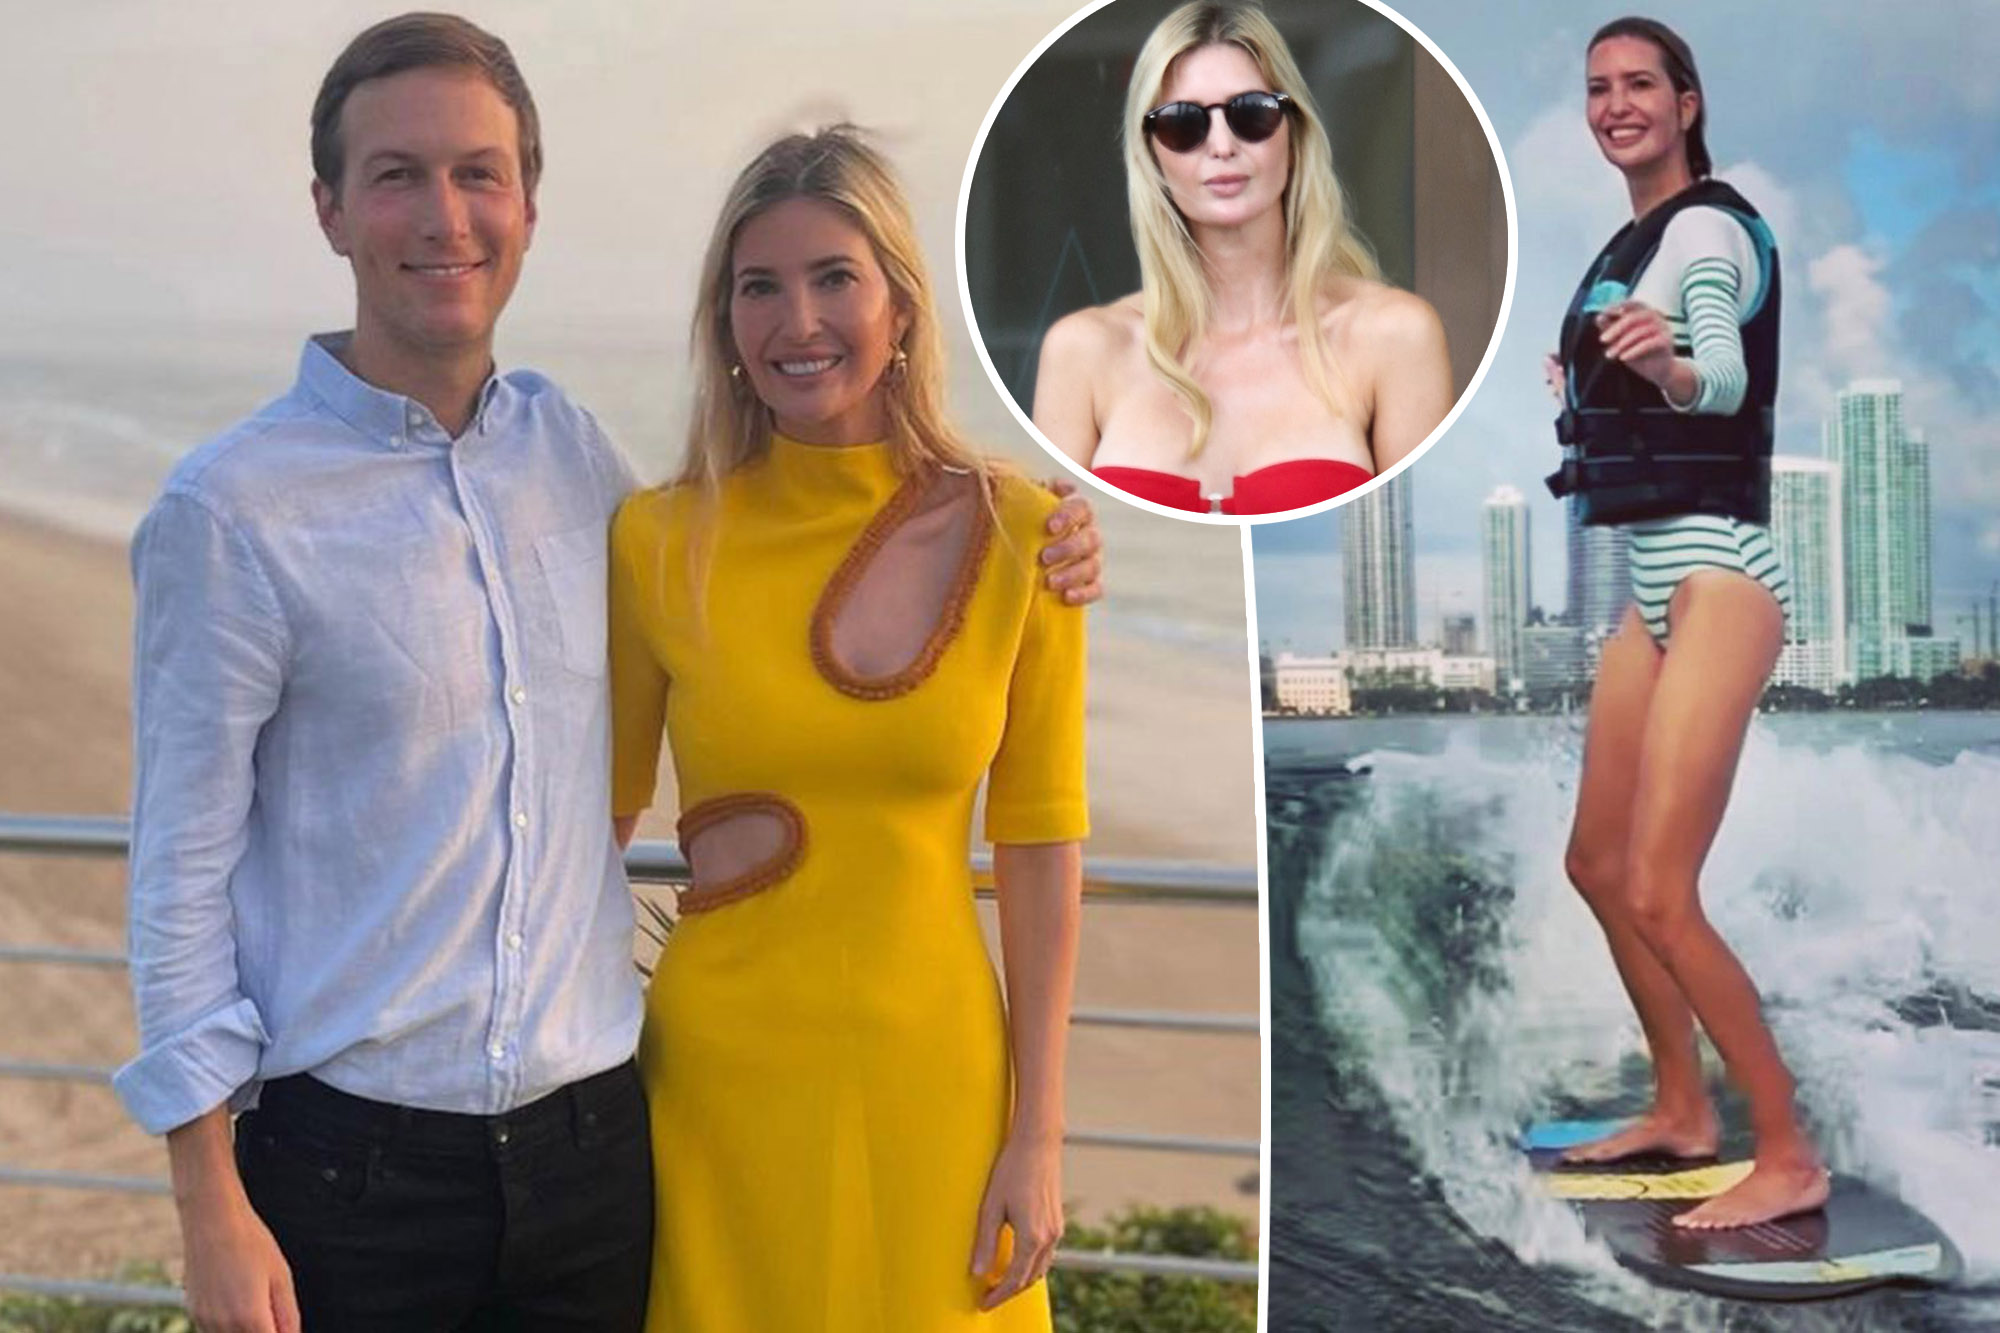 dennis reindl recommends ivanka trump in a bathing suit pic